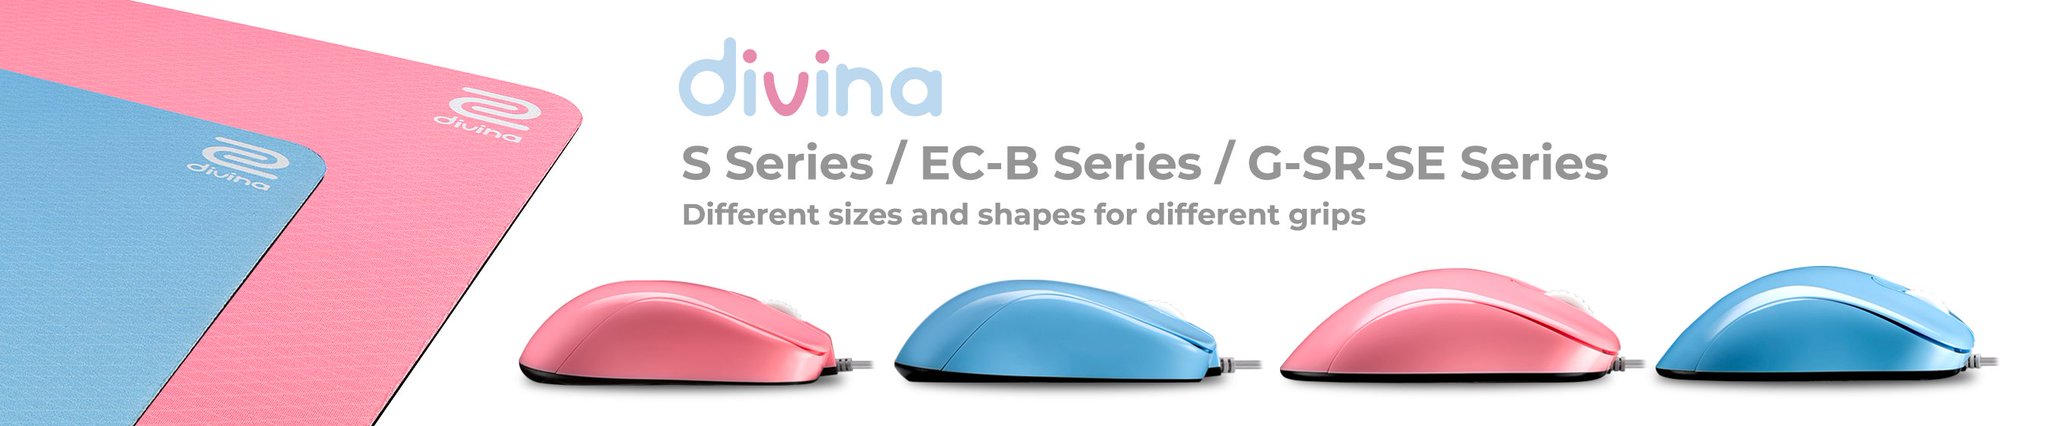 Zowie Divina Introducing The Zowie Divina Line Up In Pink And Blue The New S Series And Classic Ec B Series Both With Glossy Coating And Also The G Sr Se Mousepad T Co Wnonv7bdxo